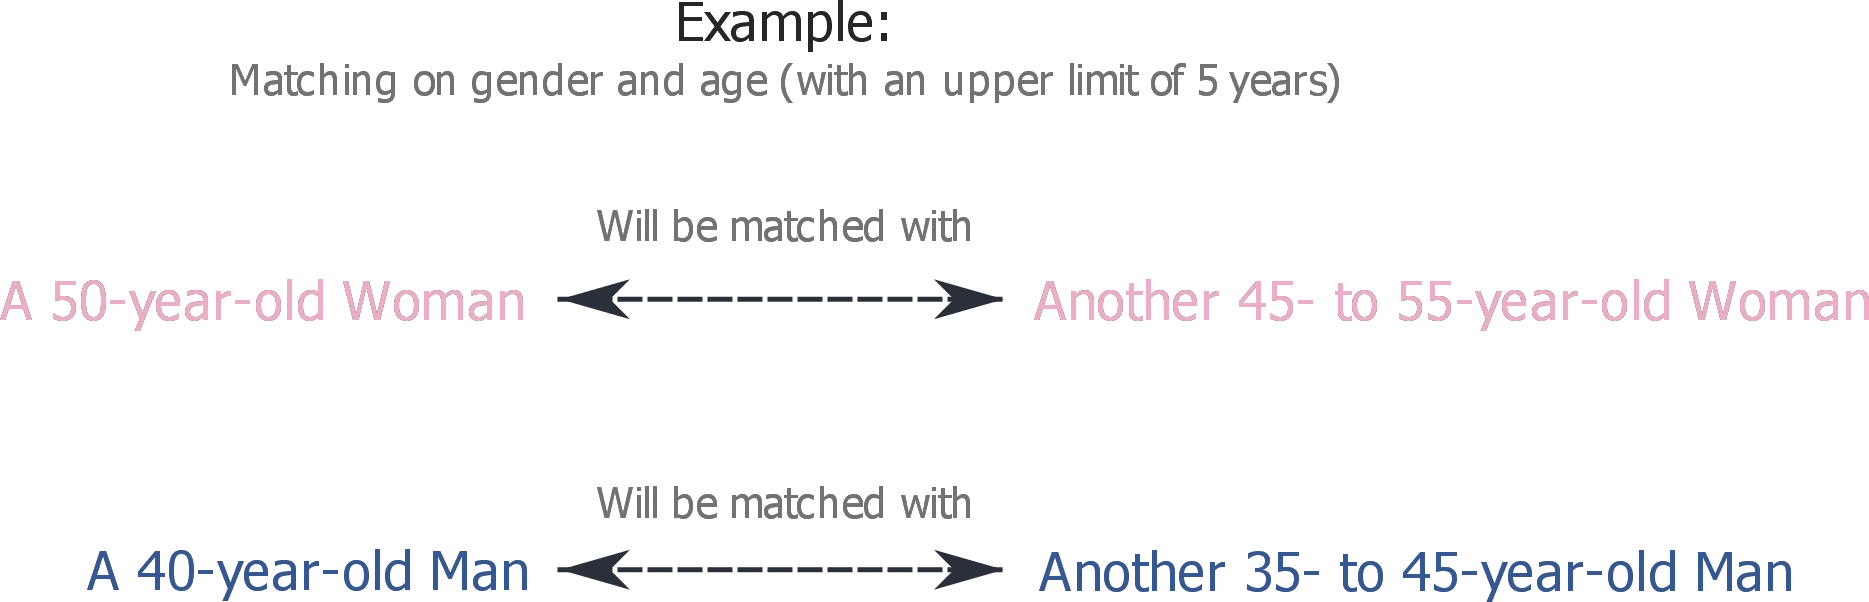 Example that shows matching on gender and age